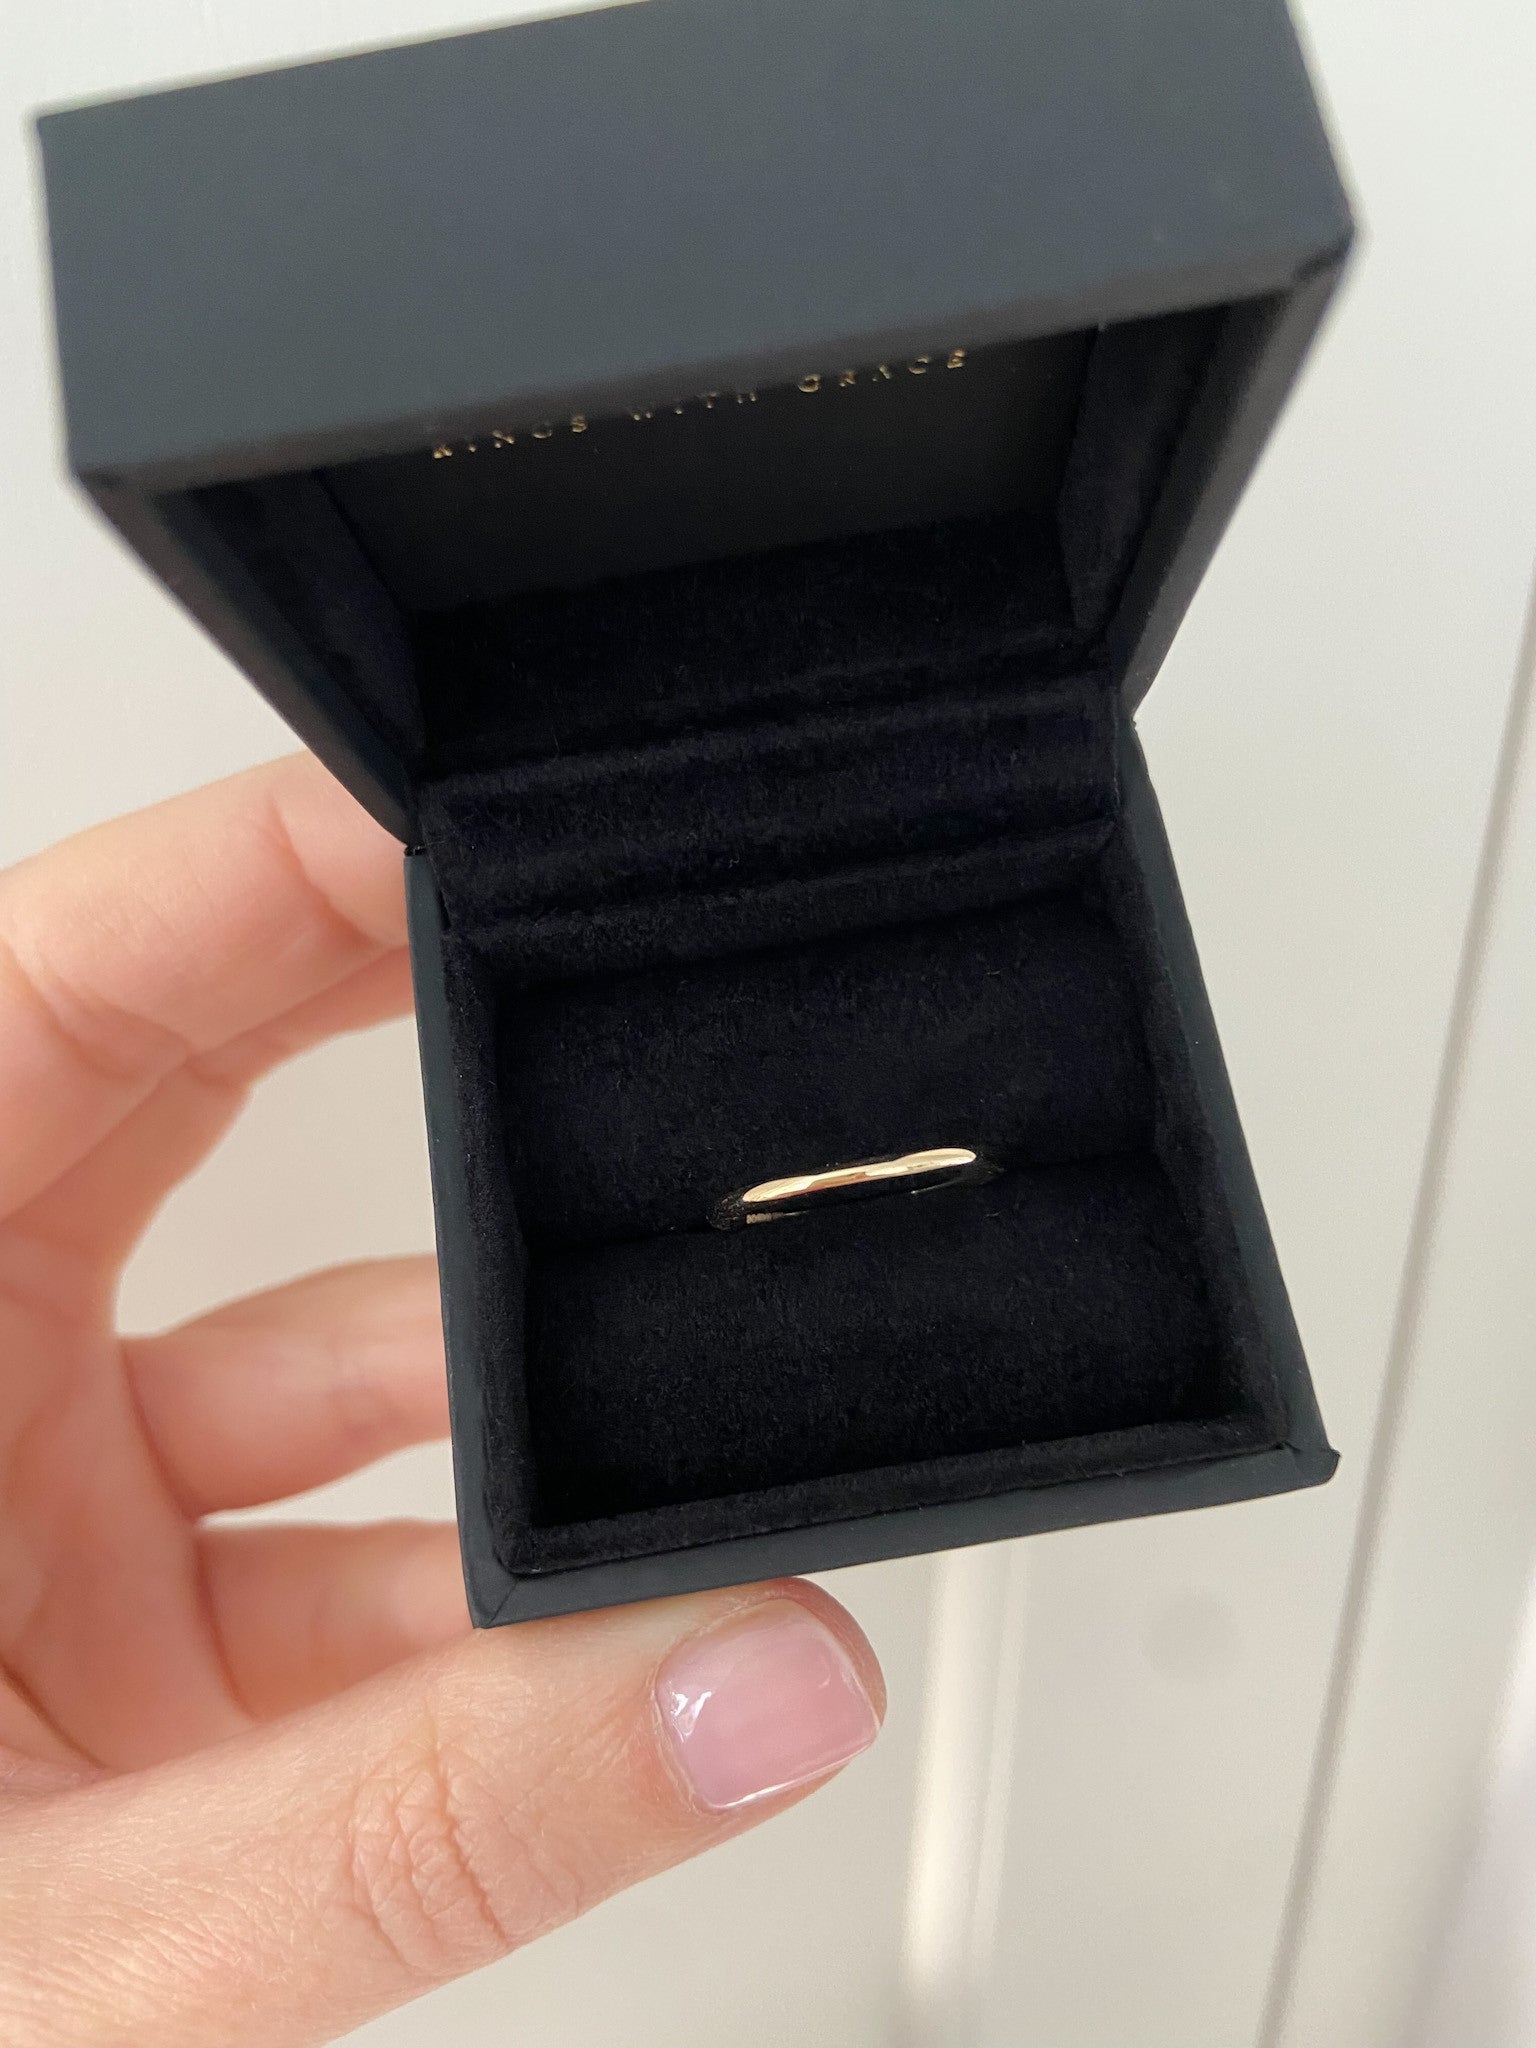 1.5mm Band 18ct Gold